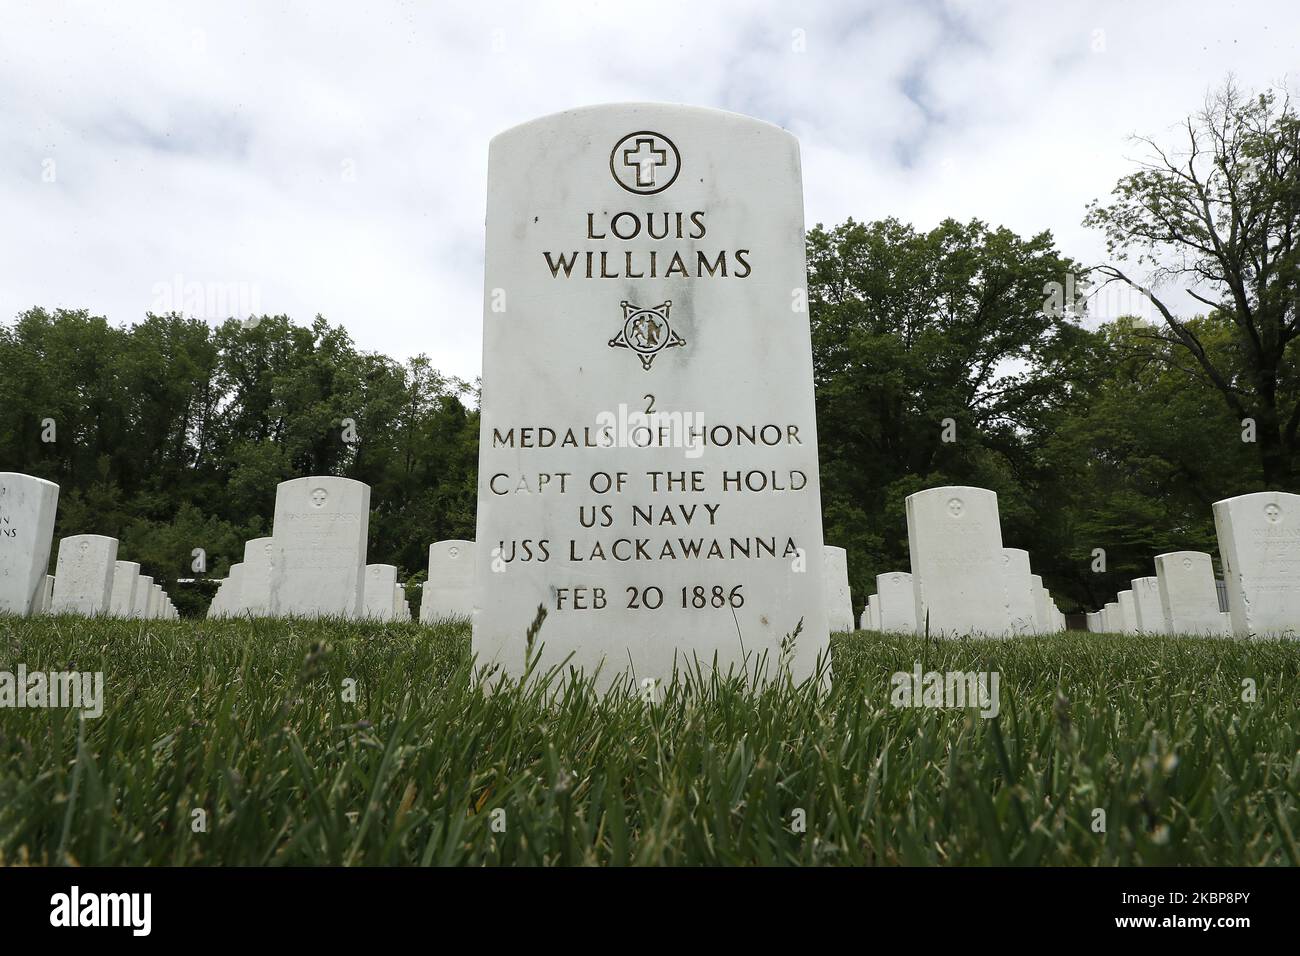 The grave stone of US Sailor Louis Williams, a recipient of two Medals of Honor, is seen at Cypress Hill Cemetery, in the Brooklyn Borough of New York City USA on May, 24, 2020. Memorial Day is an American holiday which commemorates the men and women who died while serving in the U.S. military. (Photo by John Lamparski/NurPhoto) Stock Photo